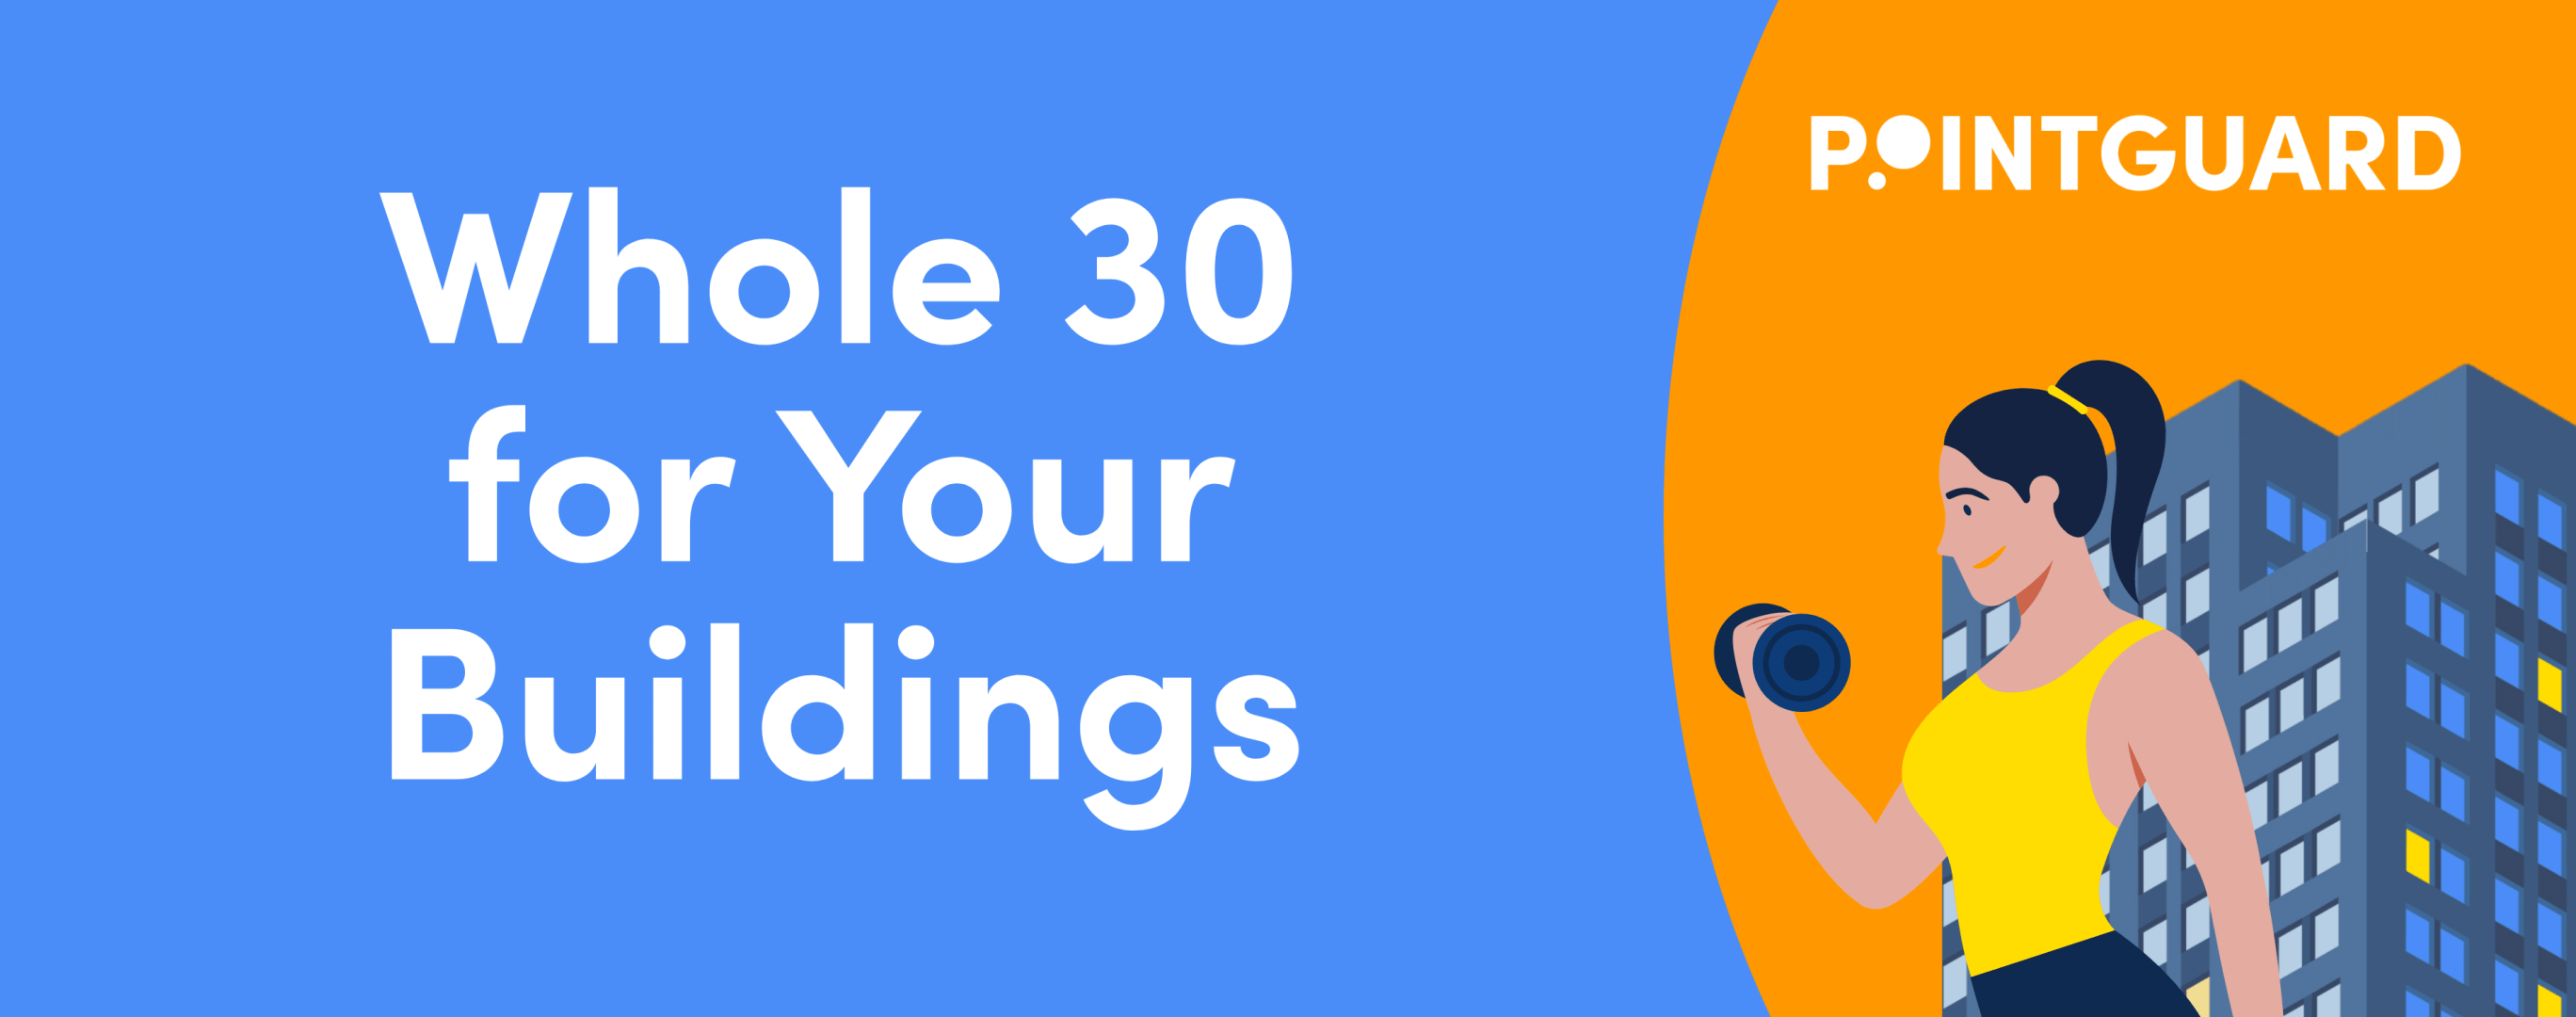 Whole 30 for Your Building